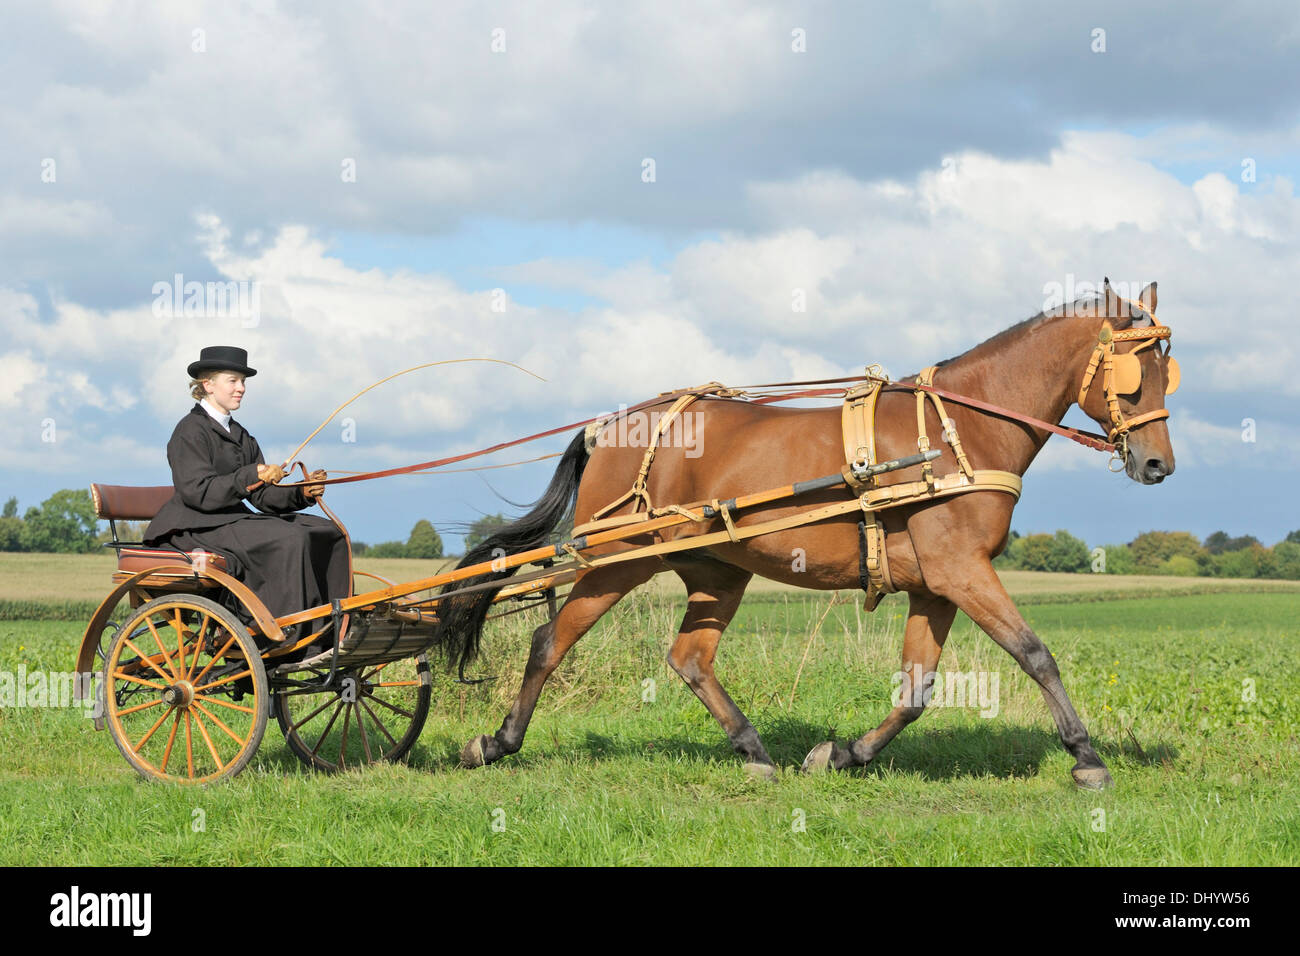 American Standardbred horse drawing a gig made 1920 in Mailand Stock Photo